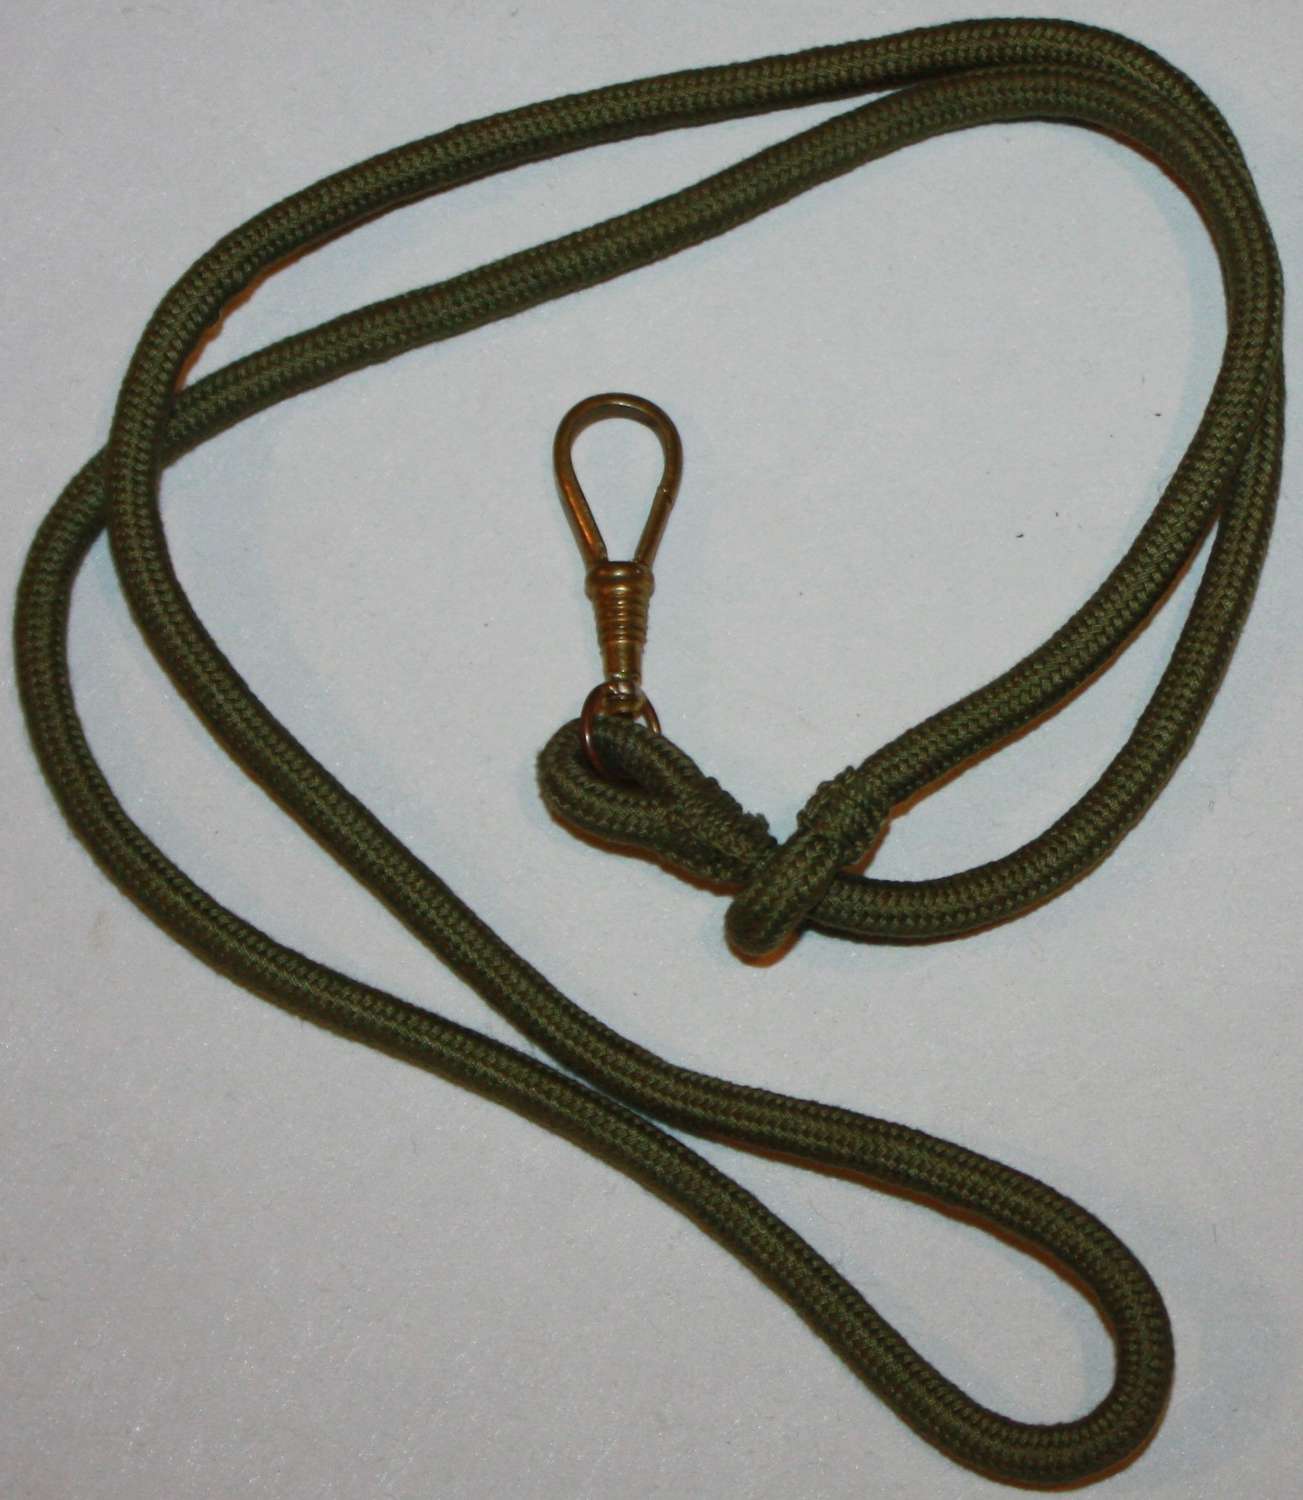 A GOOD INTERWAR / WWII PERIOD OFFICERS WHISTLE LANYARD